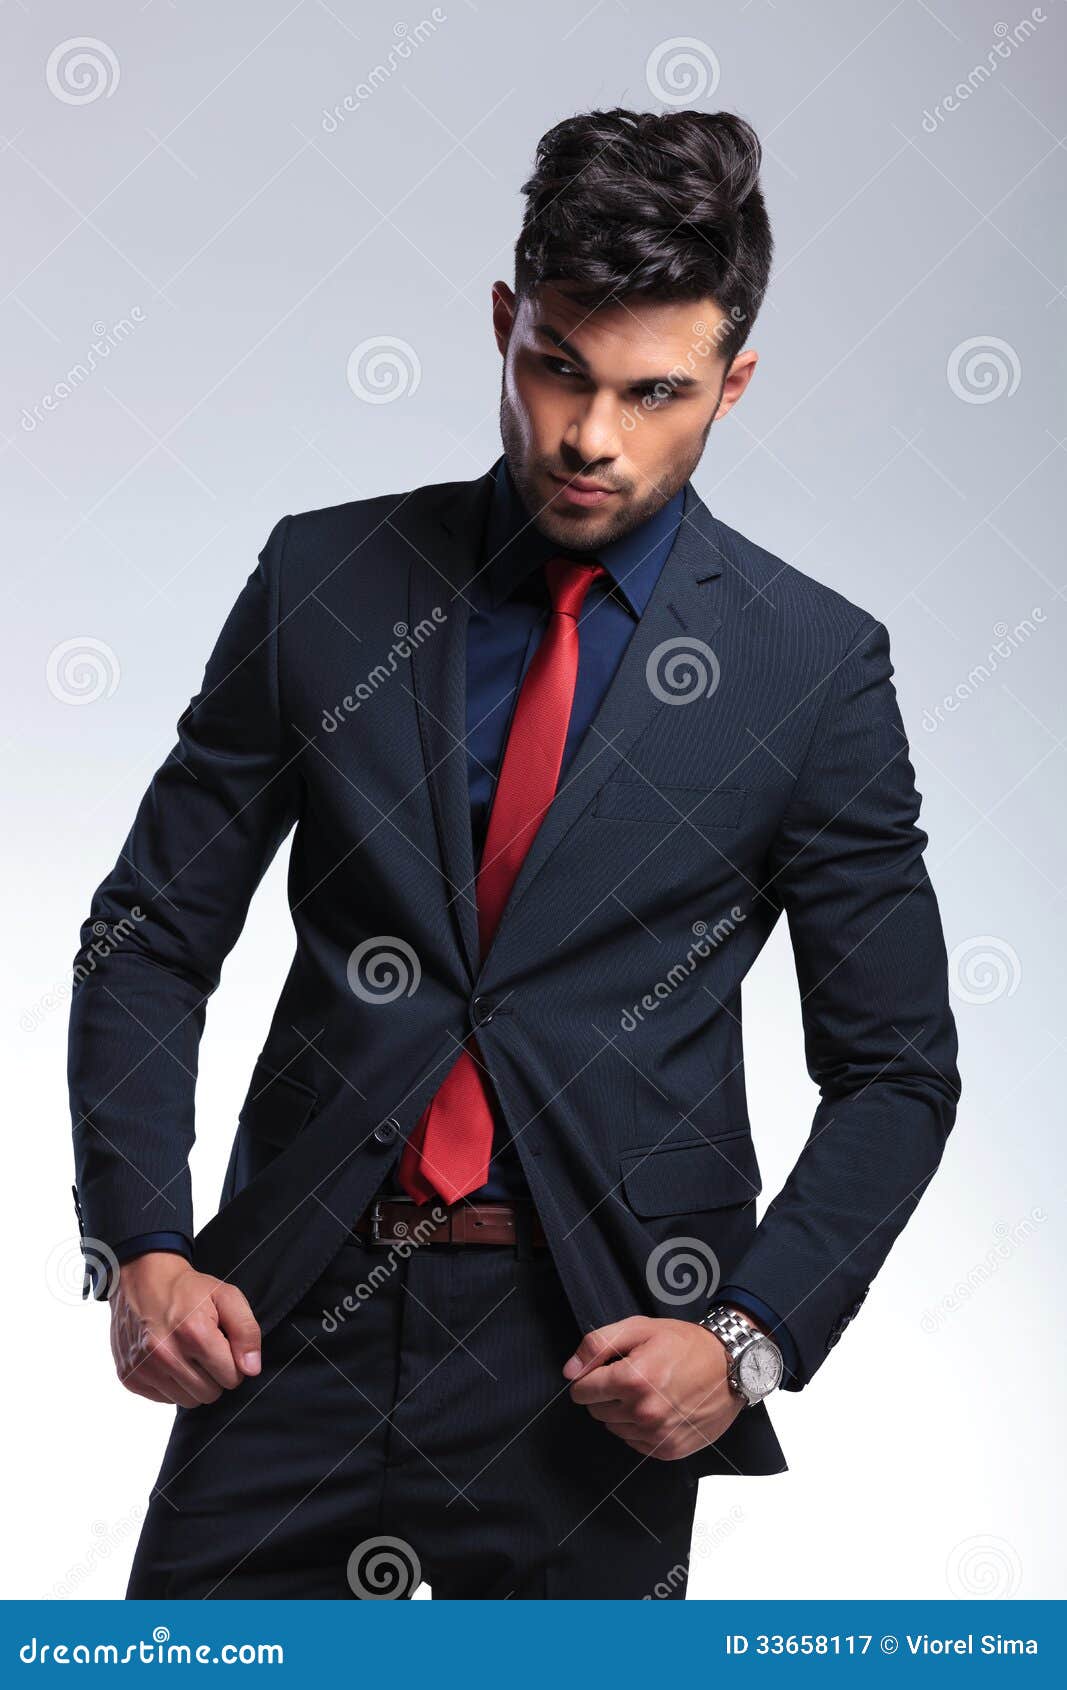 Business Man Fixes His Suit Jacket Stock Image - Image of looking, male ...